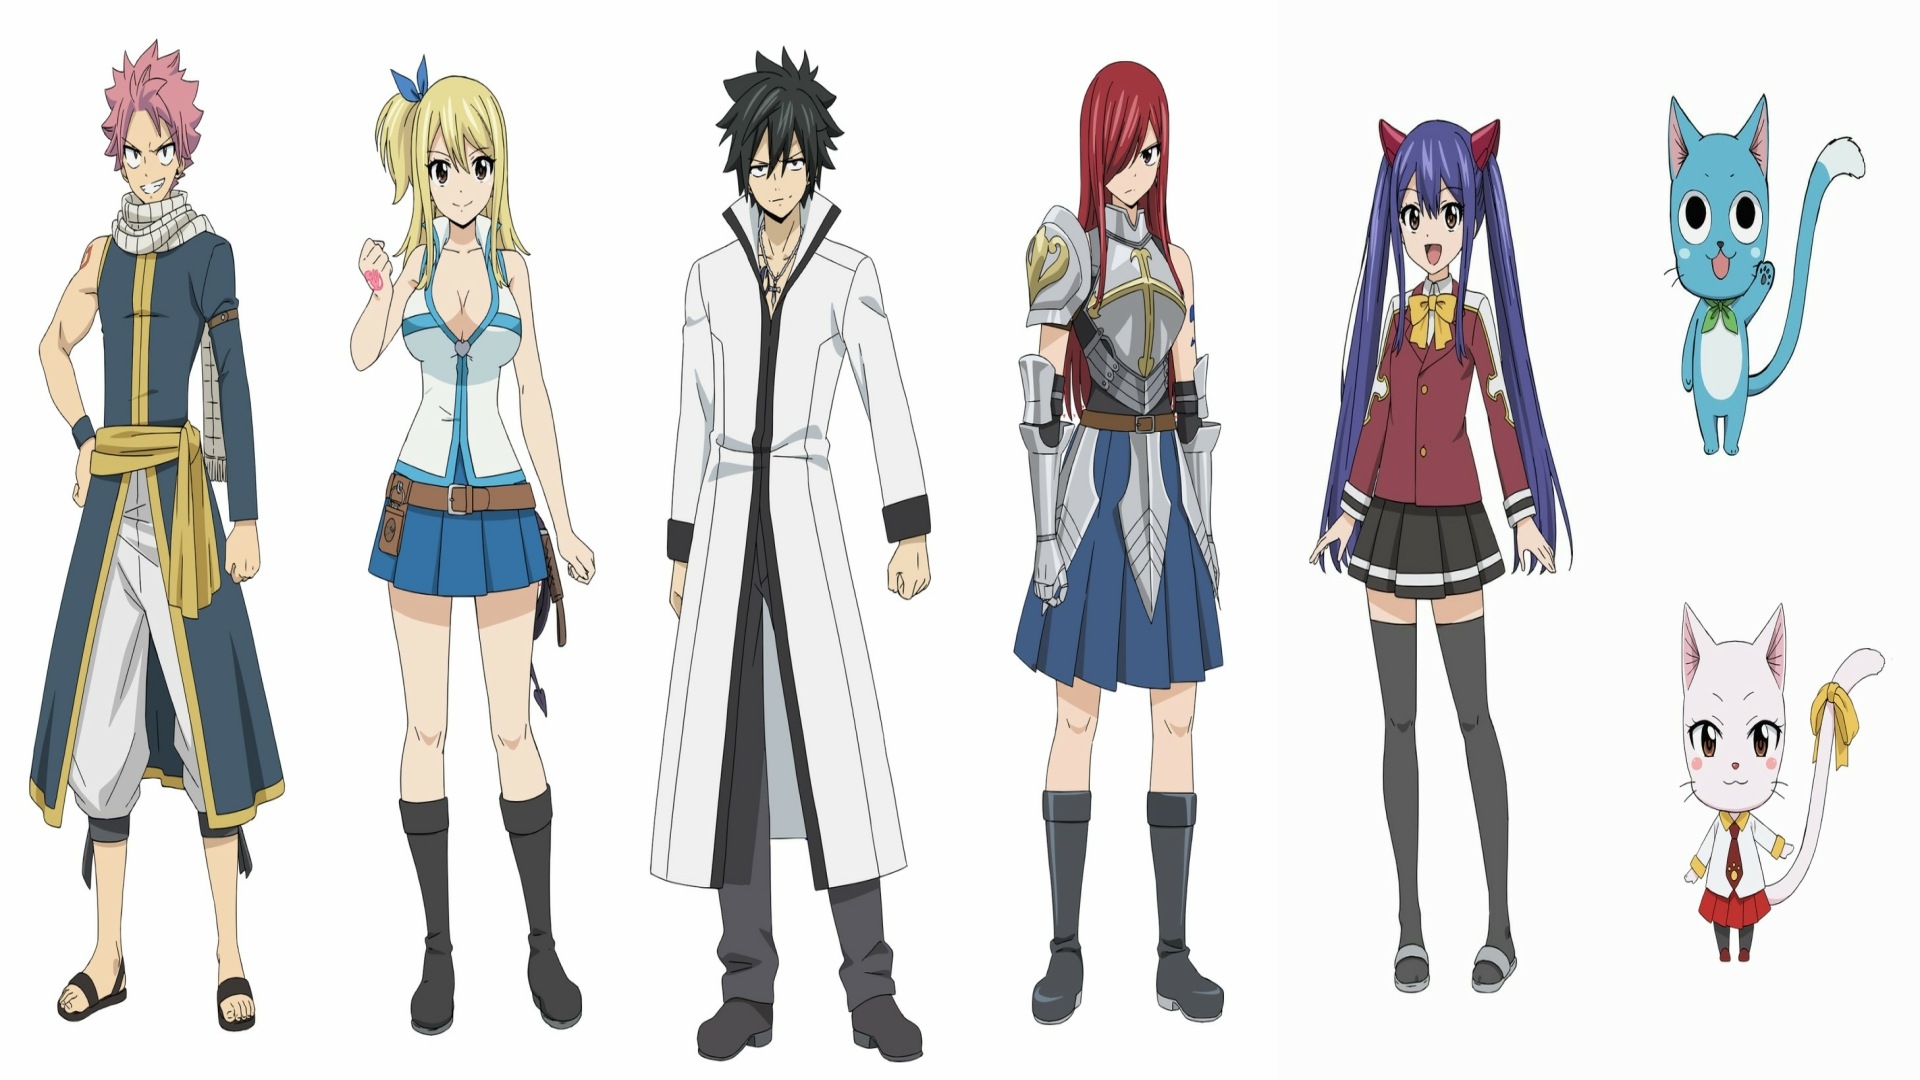 The Main Characters In Fairy Tail 100 Years Quest - Natsu Dragneel, Lucy Heartfilia, Grey Fulbuster, Ezra Scarlett, Wendy Marvell, Happy, And Charles Respectively (J.C.Staff)